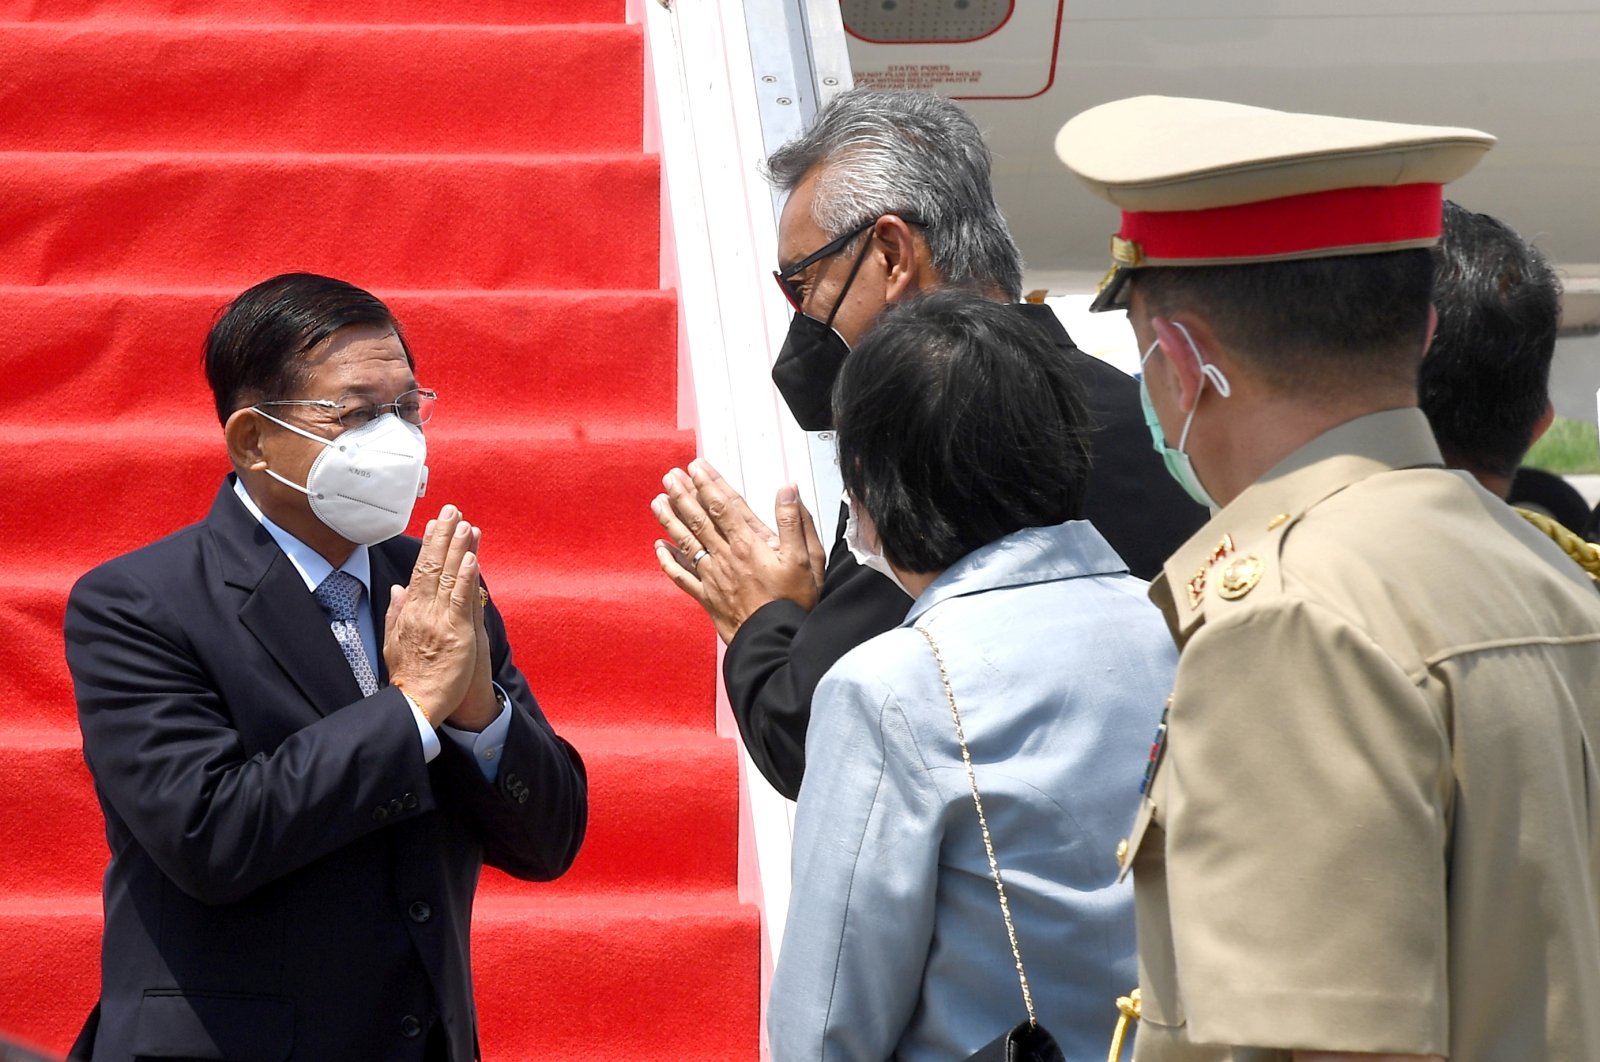 Myanmar's junta chief Senior General Min Aung Hlaing (L) gestures as he is welcomed upon his arrival ahead of the ASEAN leaders' summit, at the Soekarno Hatta International airport in Tangerang, on the outskirts of Jakarta, Indonesia, April 24, 2021. (Indonesian Presidential Palace via Reuters)